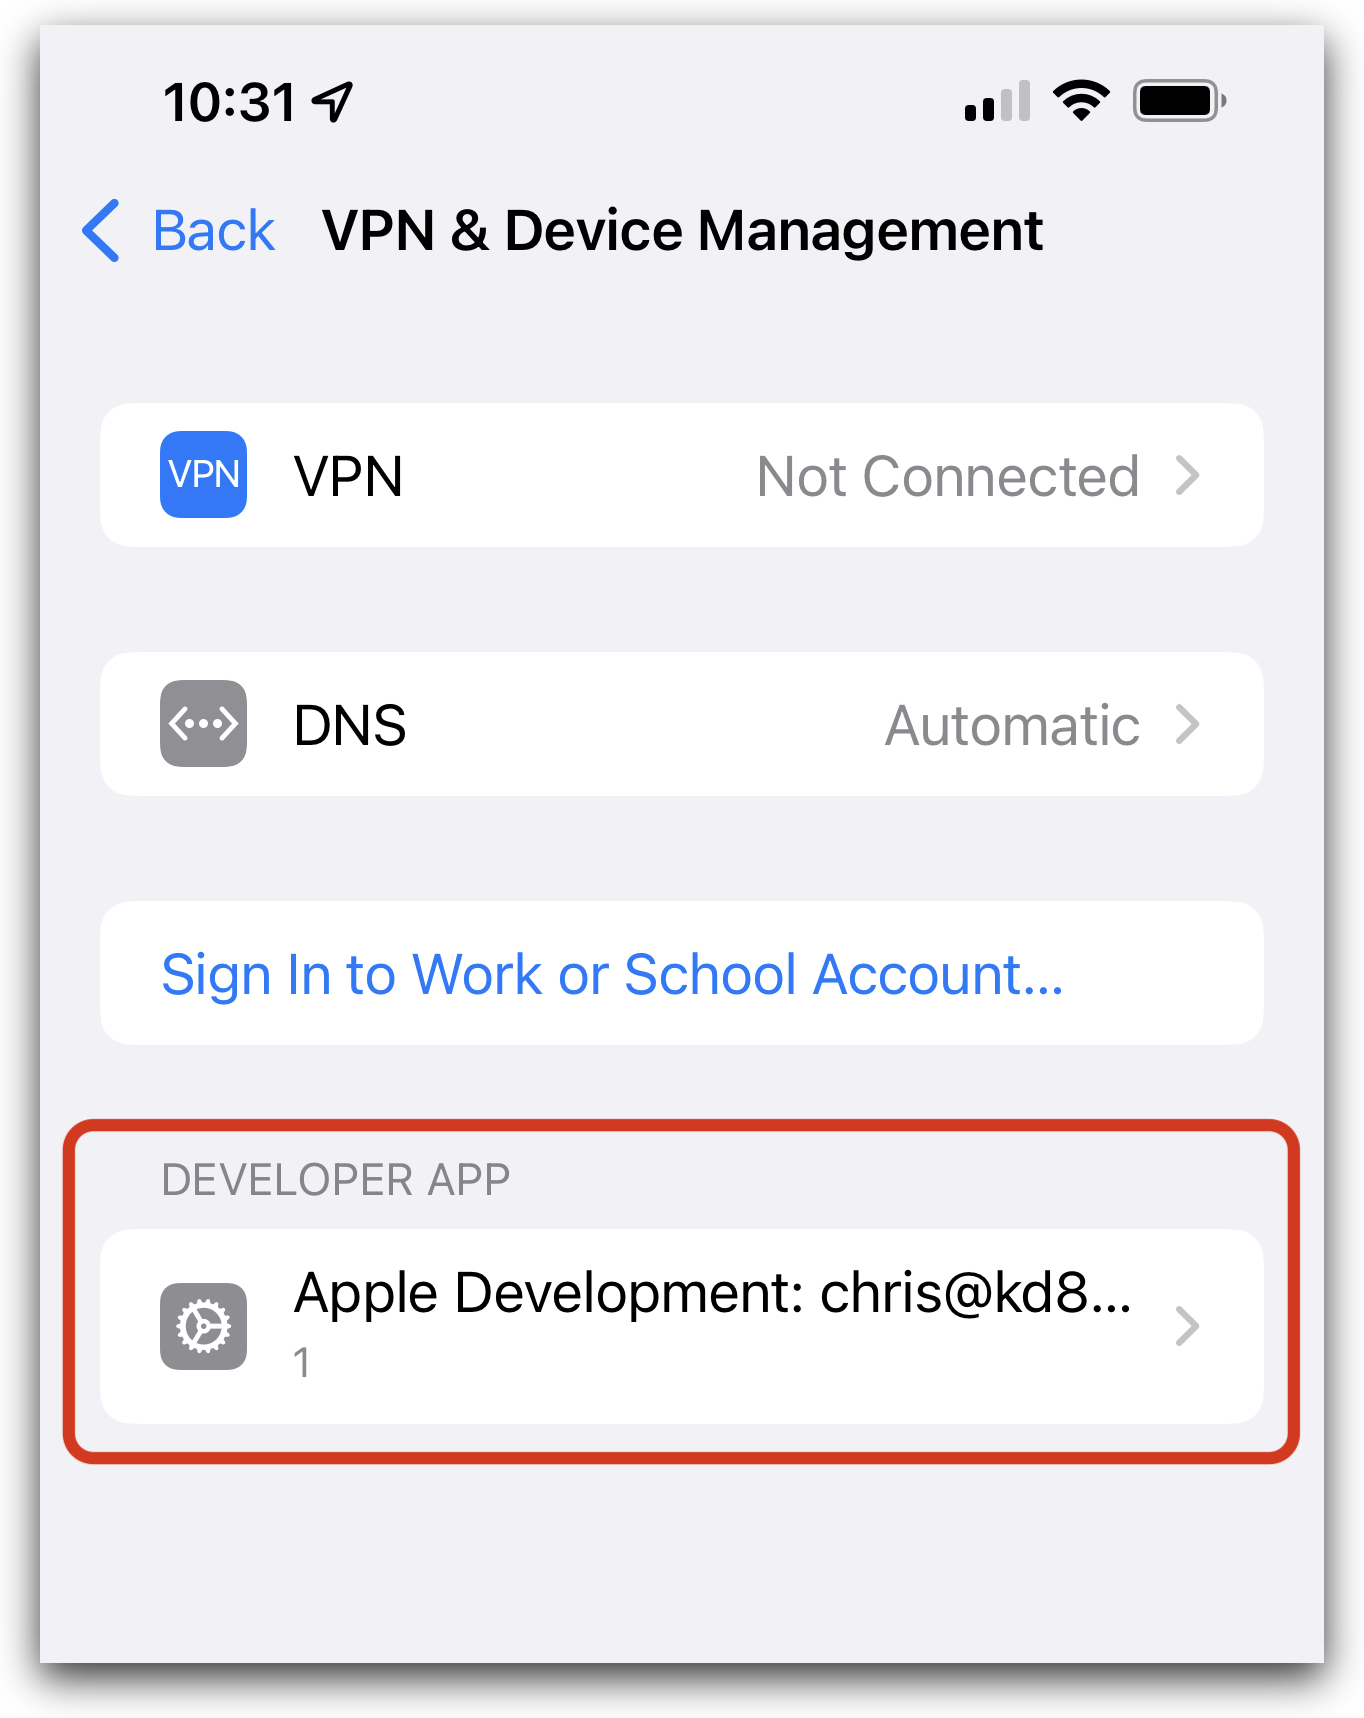 Device Management settings lists the provisioning profile associated with my new Apple ID